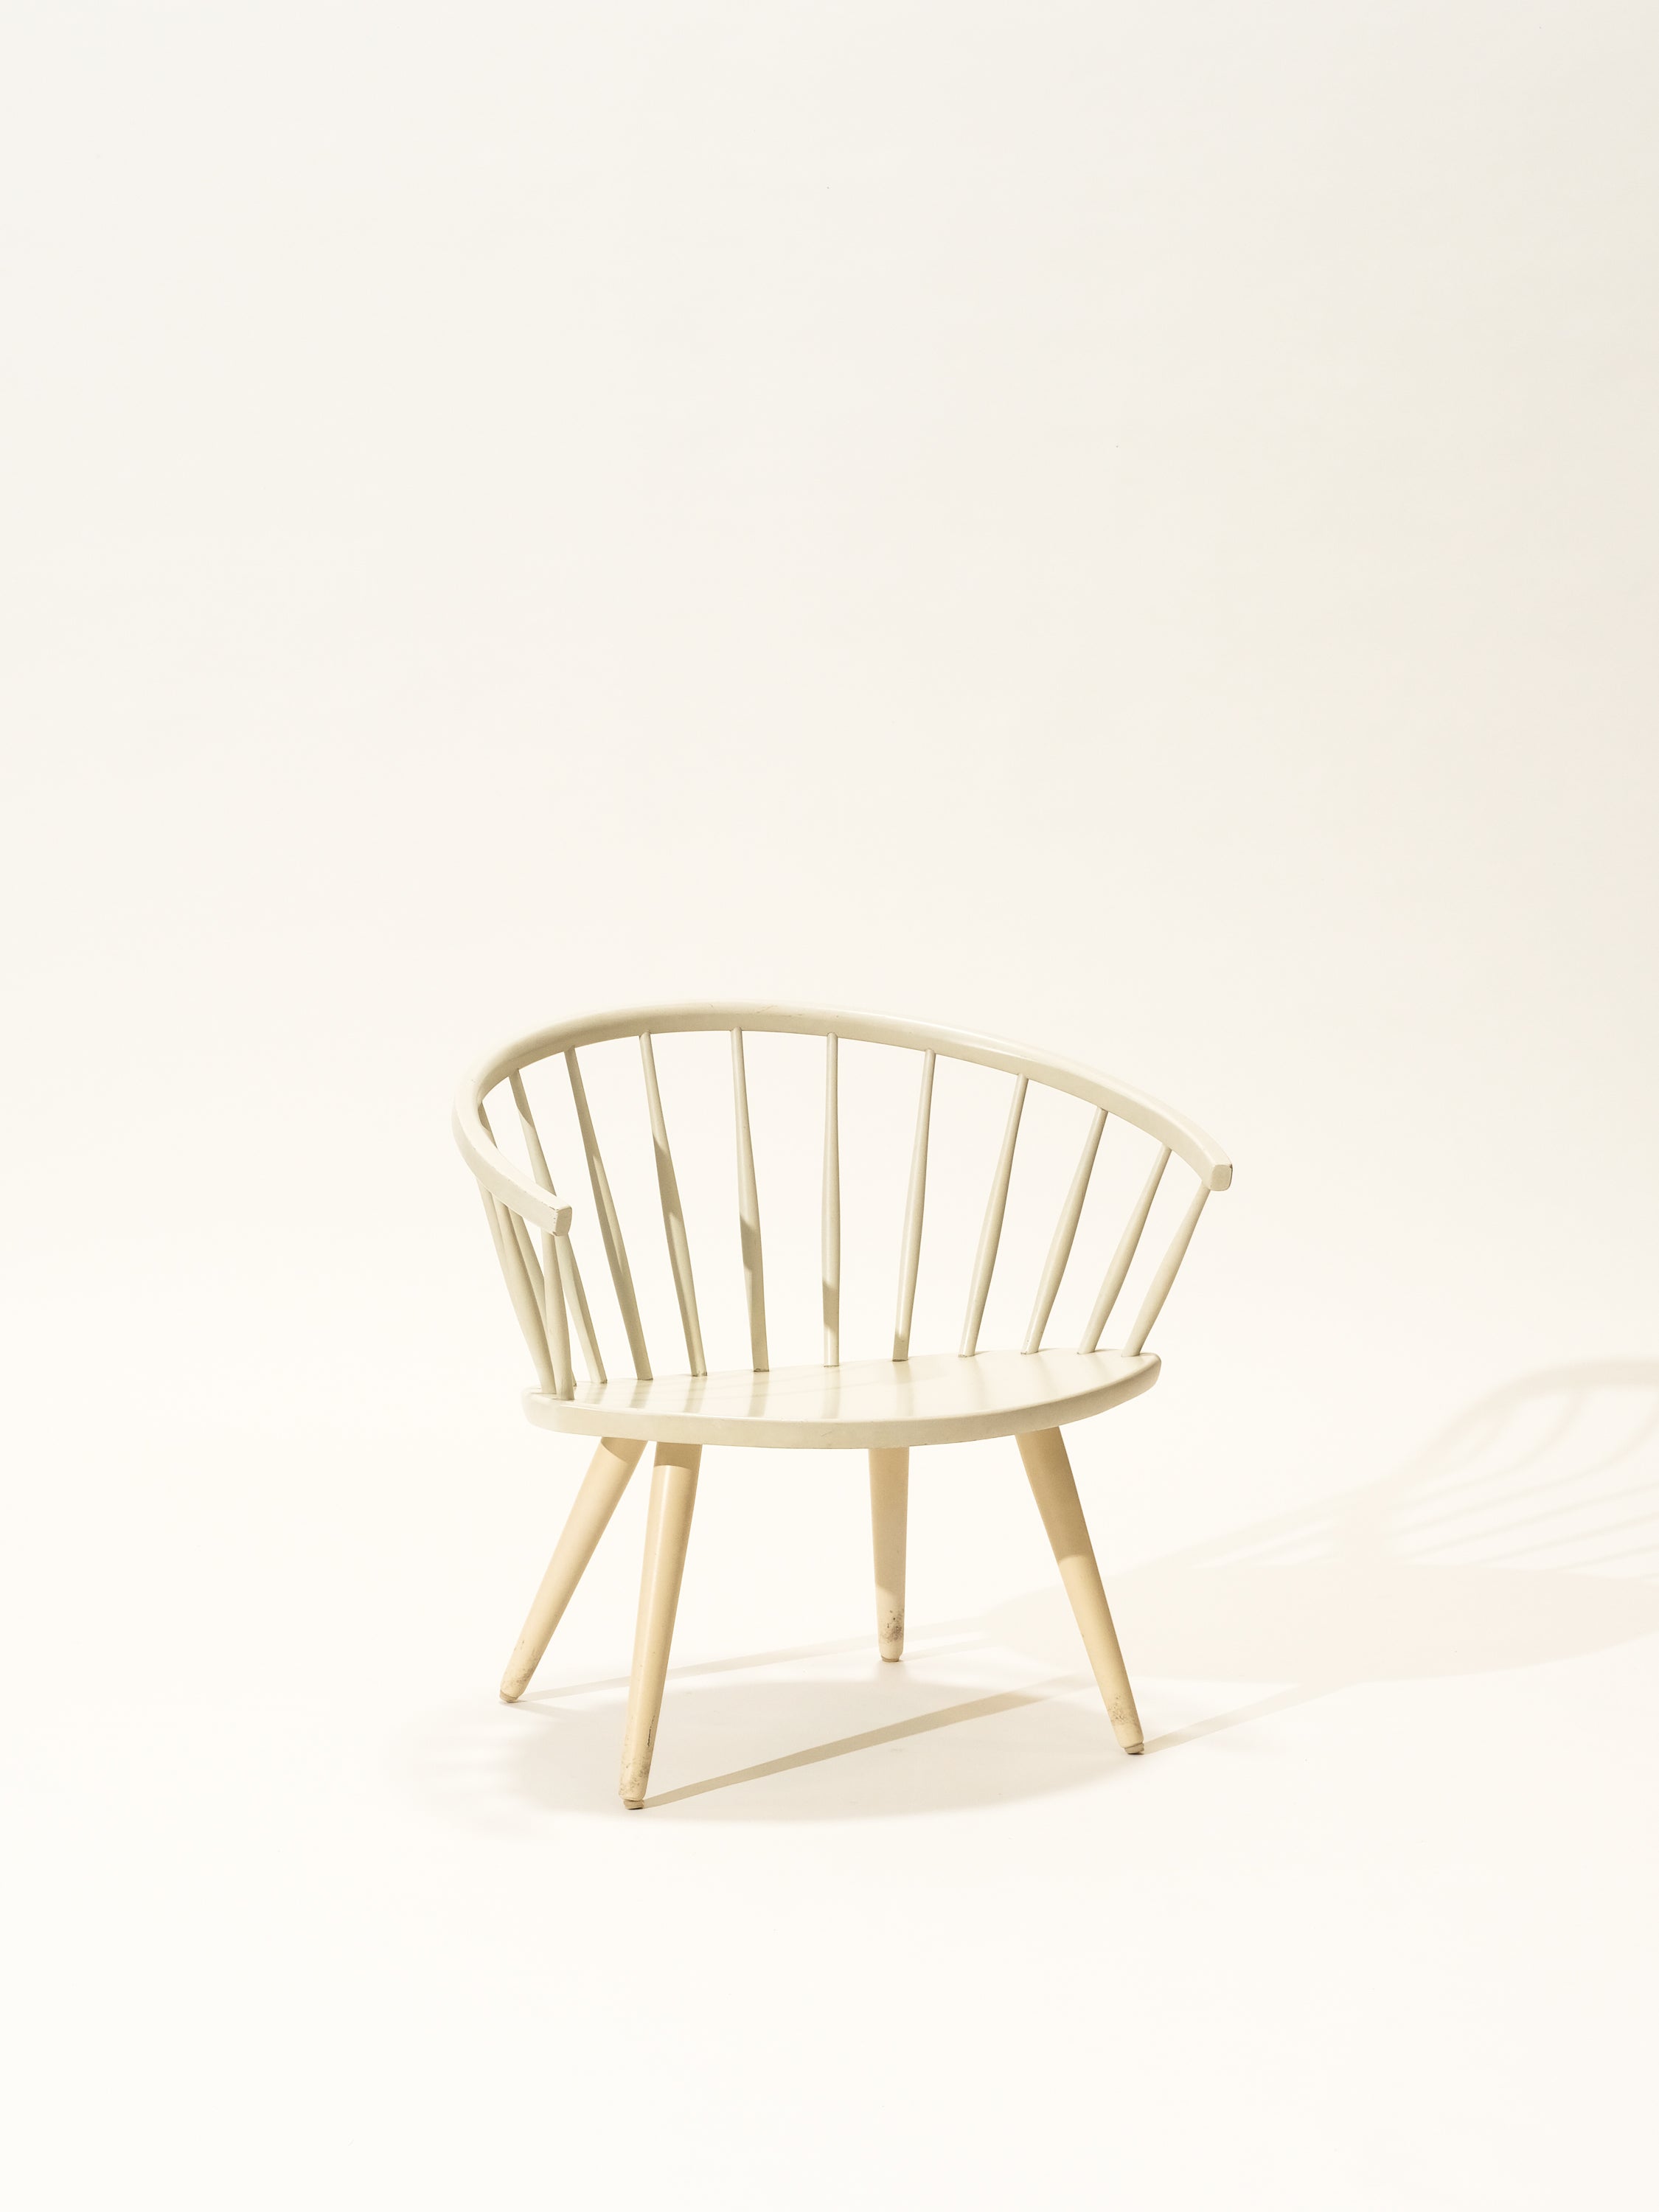 White 'Arka' Chair by Yngve Ekström for Stolab, 1950s